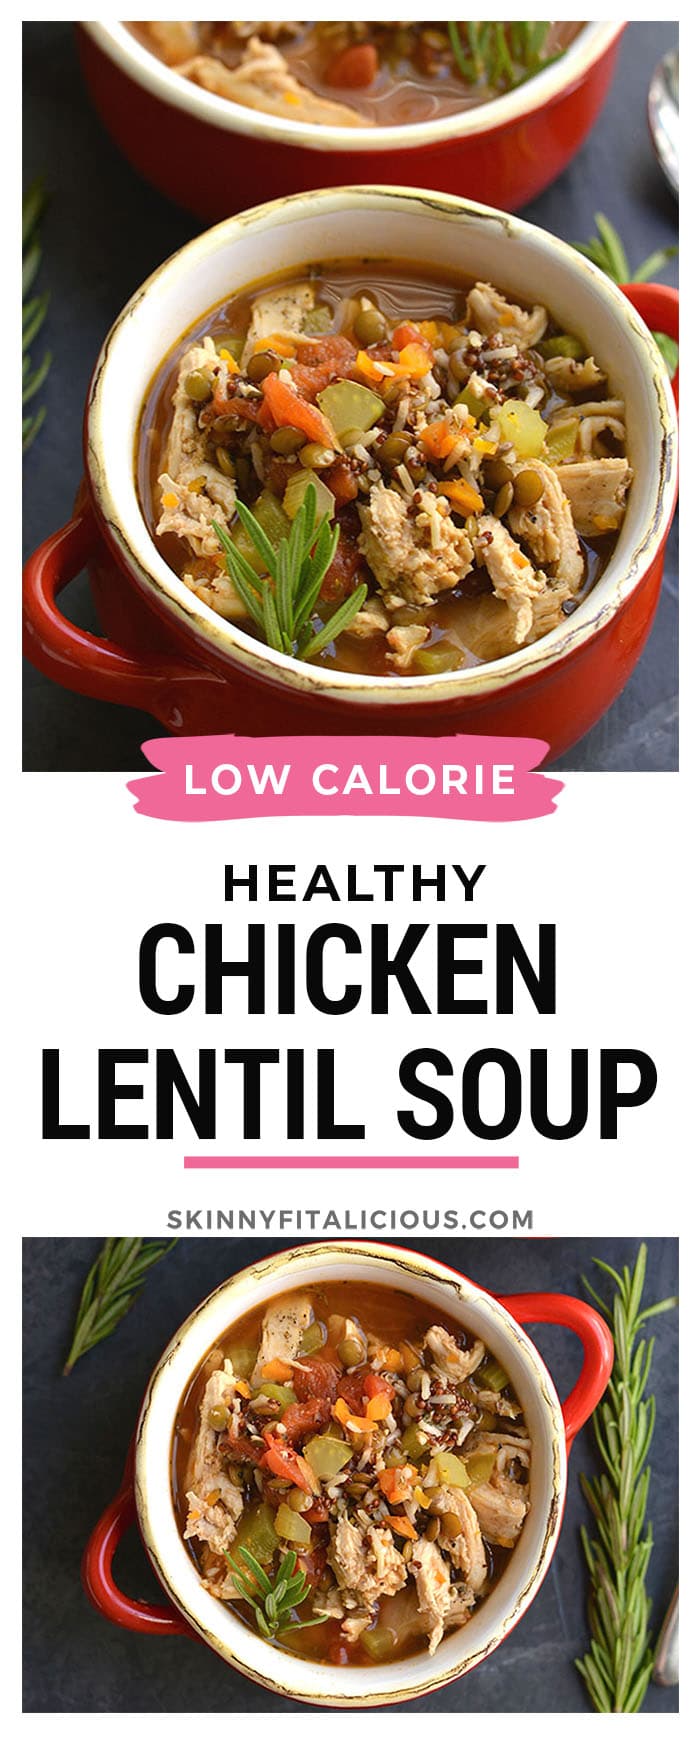 Chicken Lentil Soup is a wholesome, comforting and nutritious bowl of vegetables, rice and lentils. A delicious bowl of warmth for a cold day! Gluten Free + Low Calorie